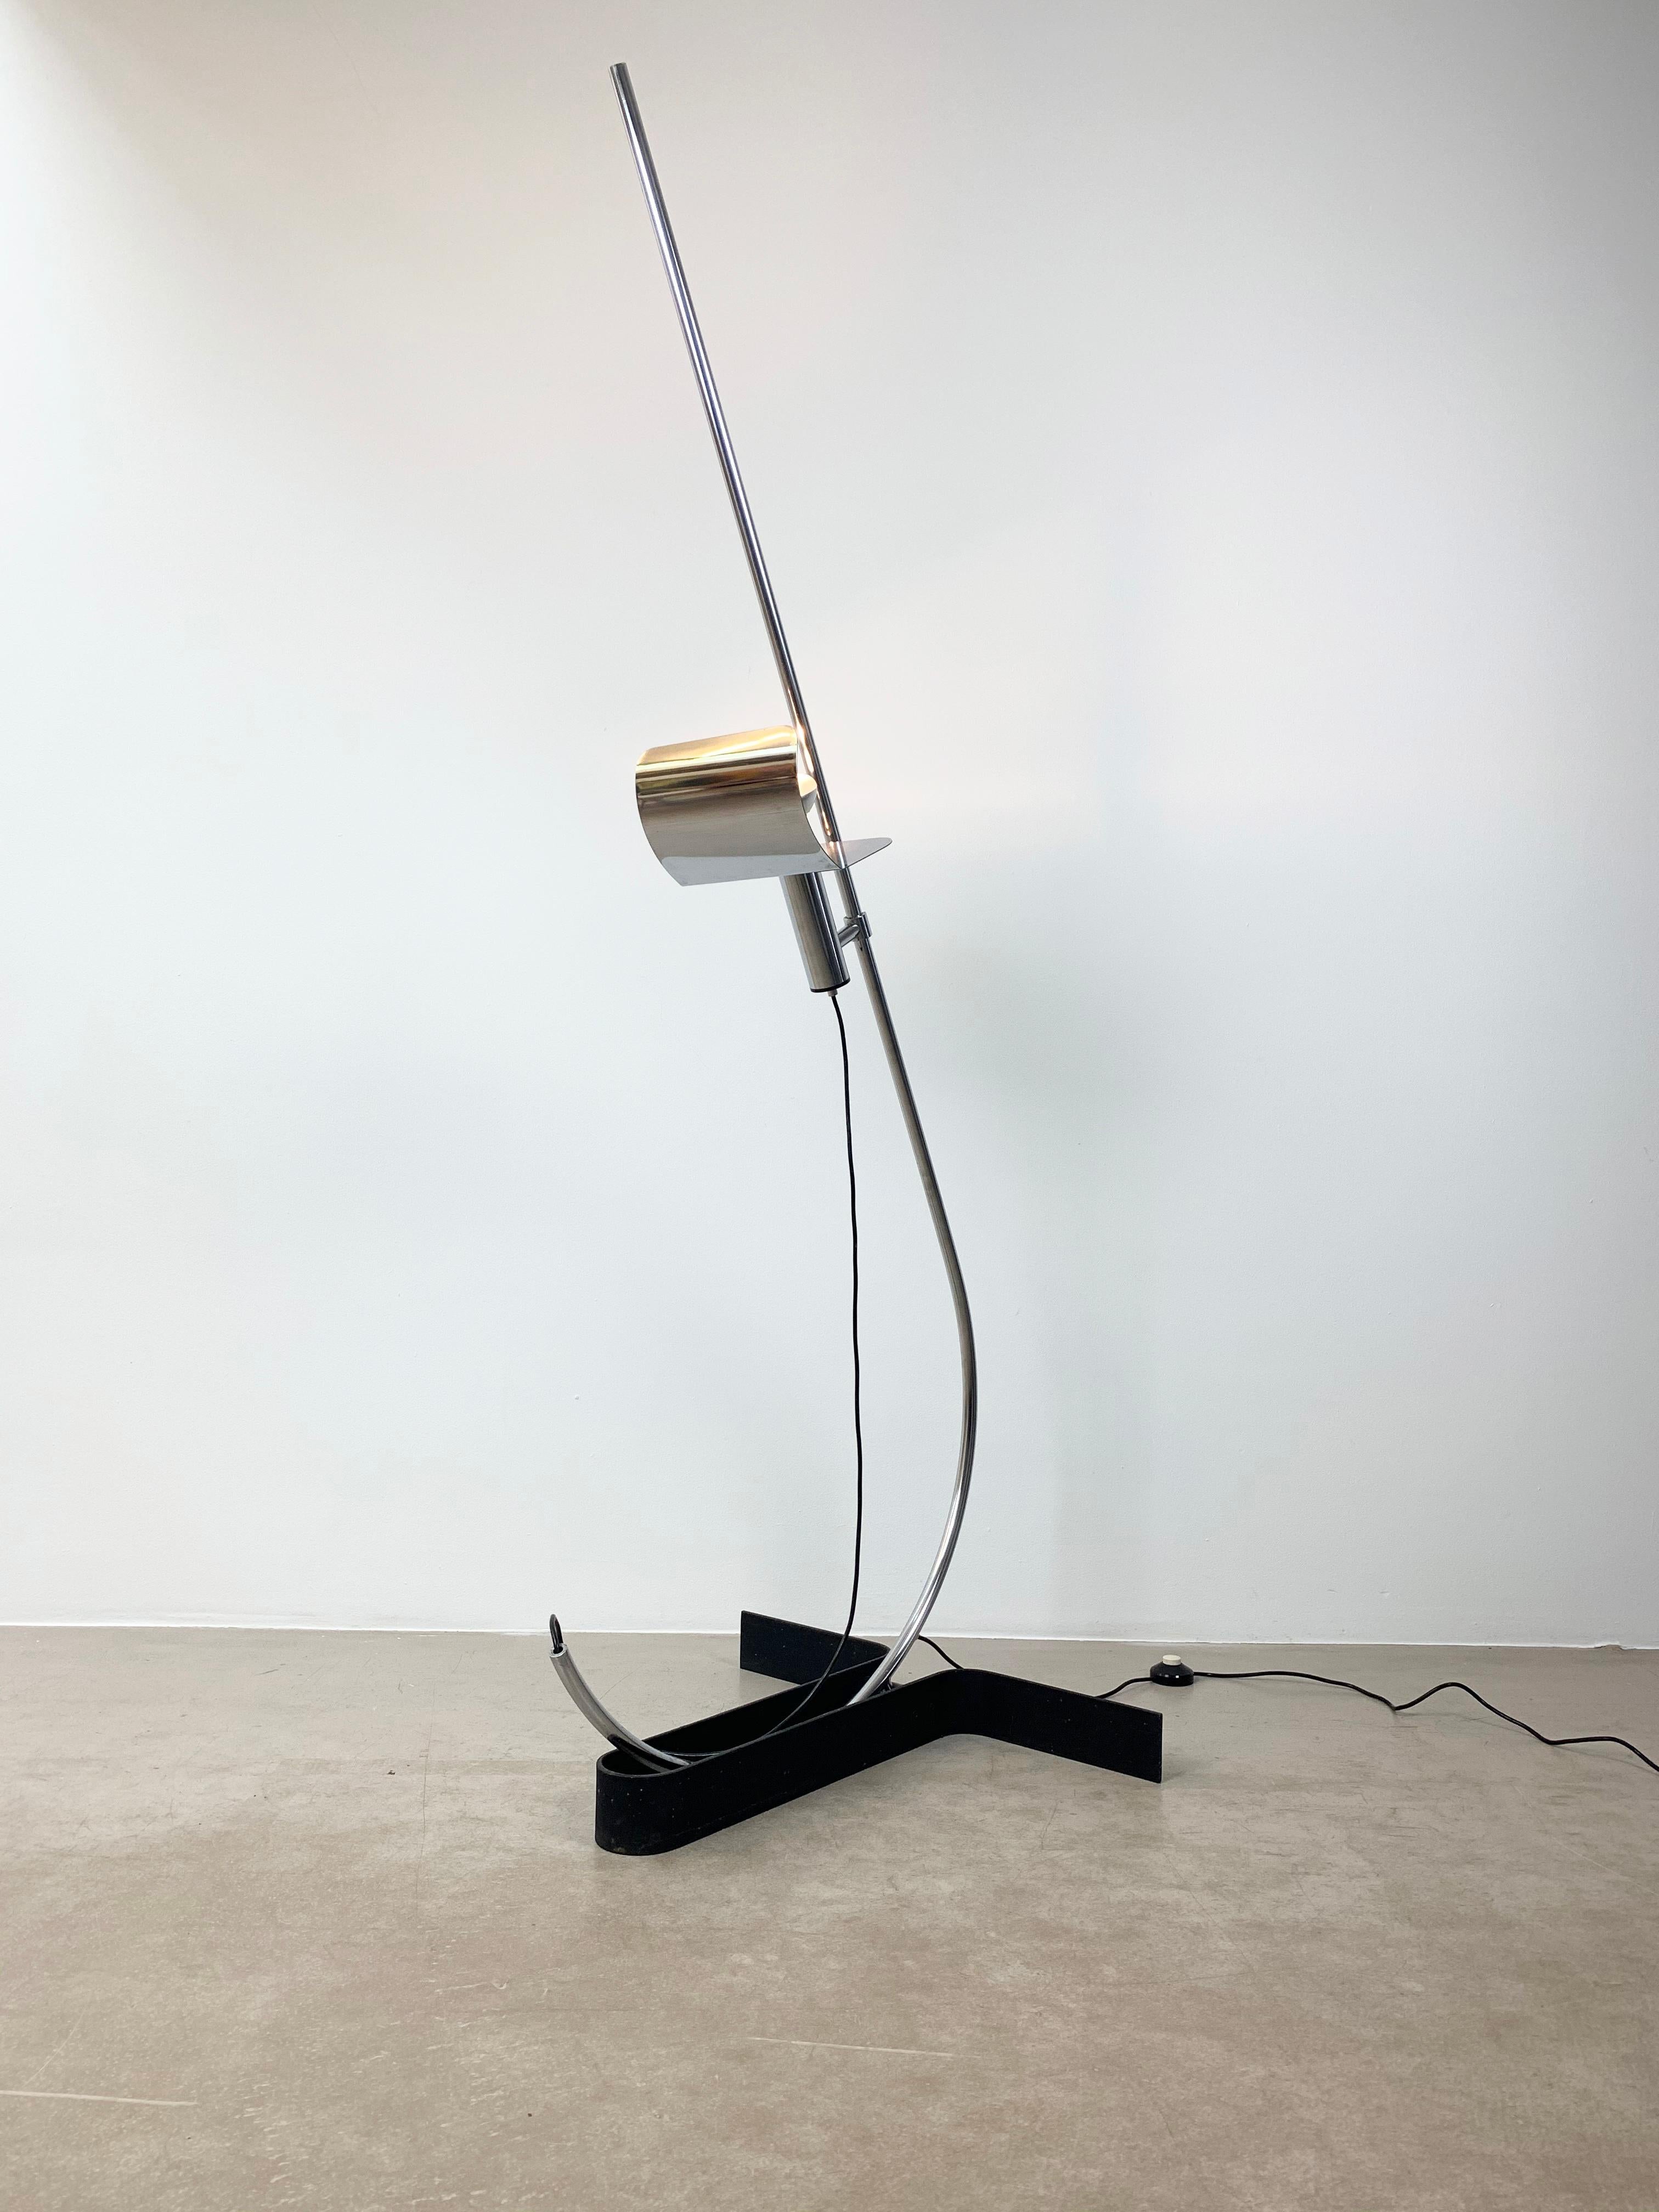 This vintage chrome floor lamp was designed during the 1970s by Ennio Chiggio and manufactured in Italy by Lumenform. The base is made from painted iron while the stem and the shade are from chromed steel. It remains in an excellent vintage